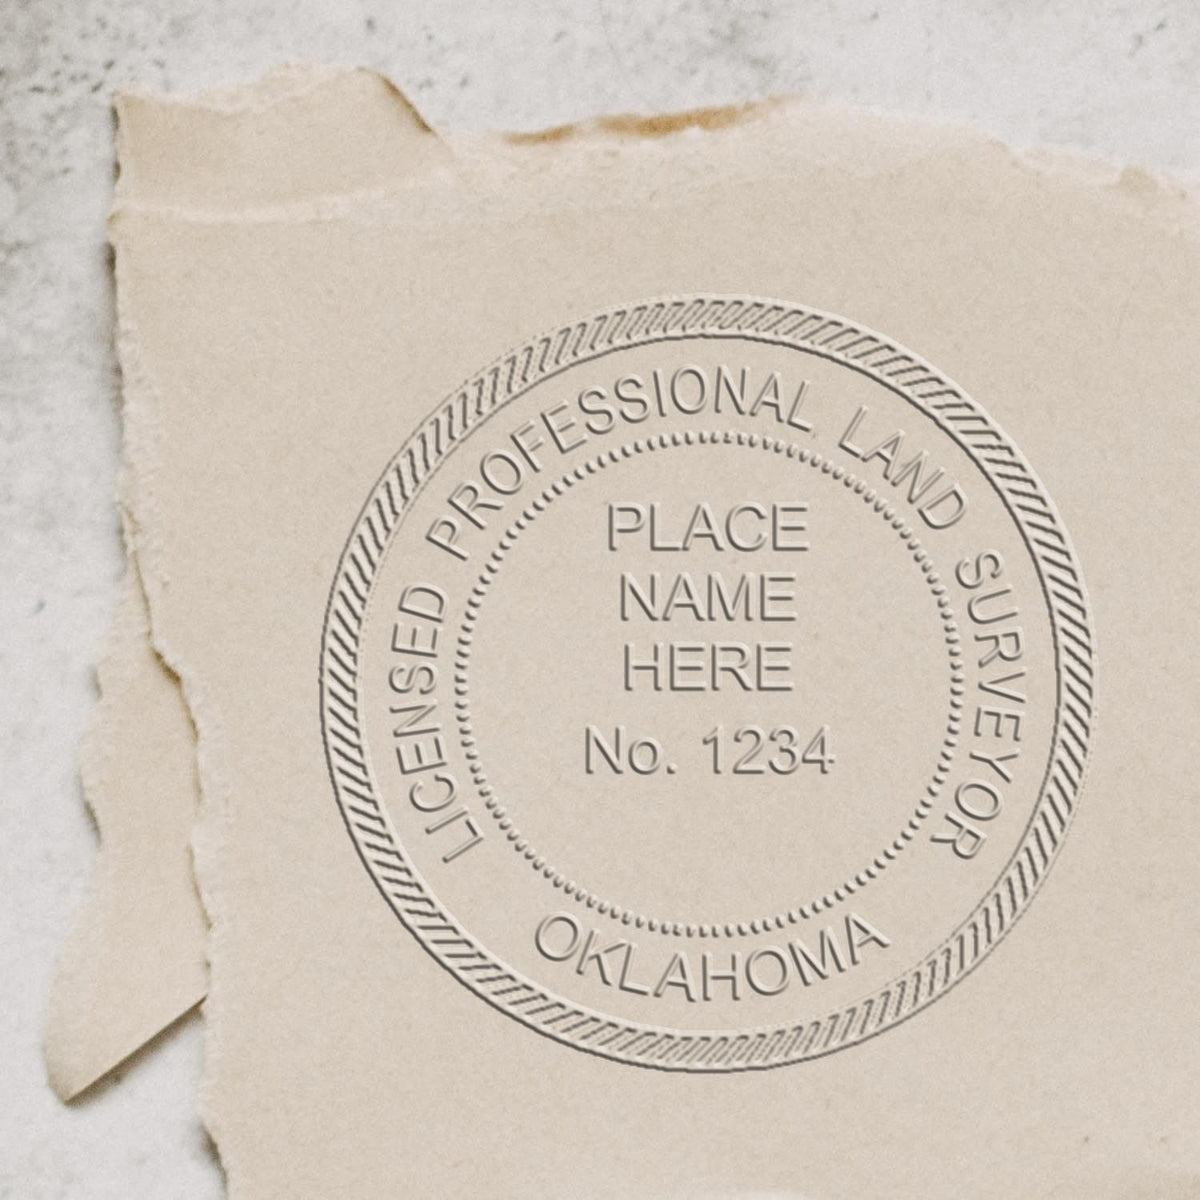 An in use photo of the Hybrid Oklahoma Land Surveyor Seal showing a sample imprint on a cardstock